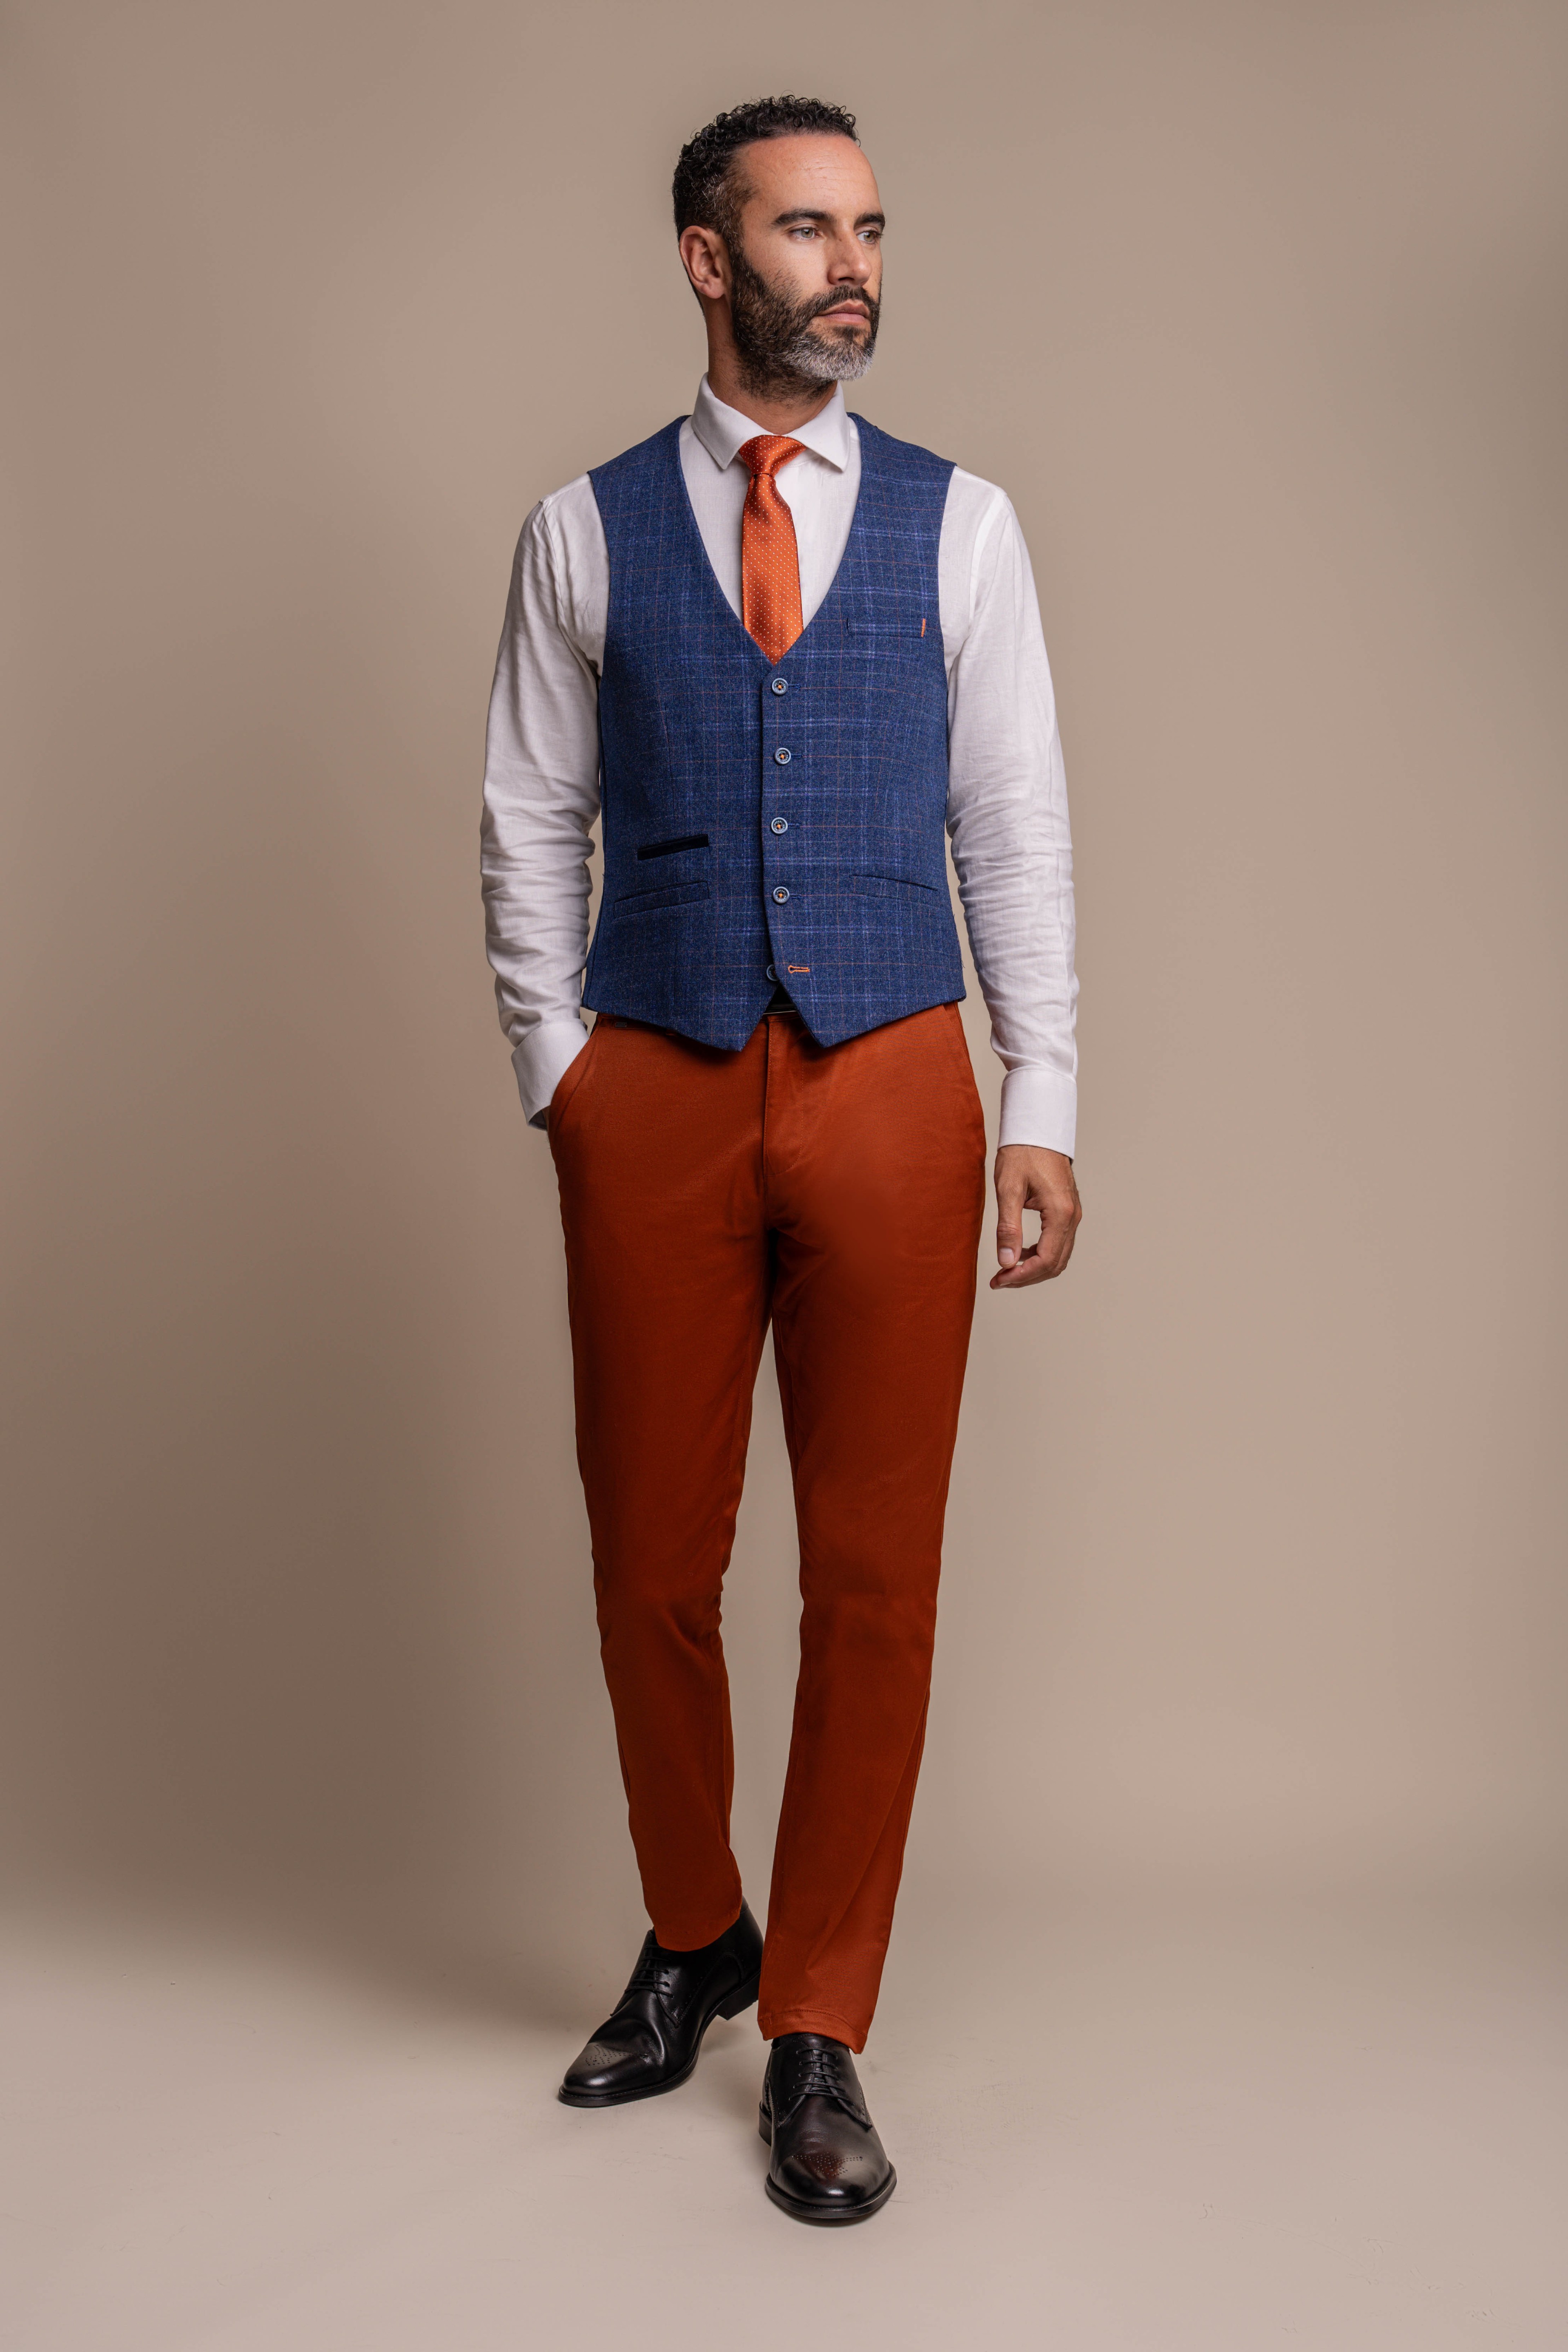 Men's Tweed Check Blue Suit & Brown Chino, Combined Suit Set